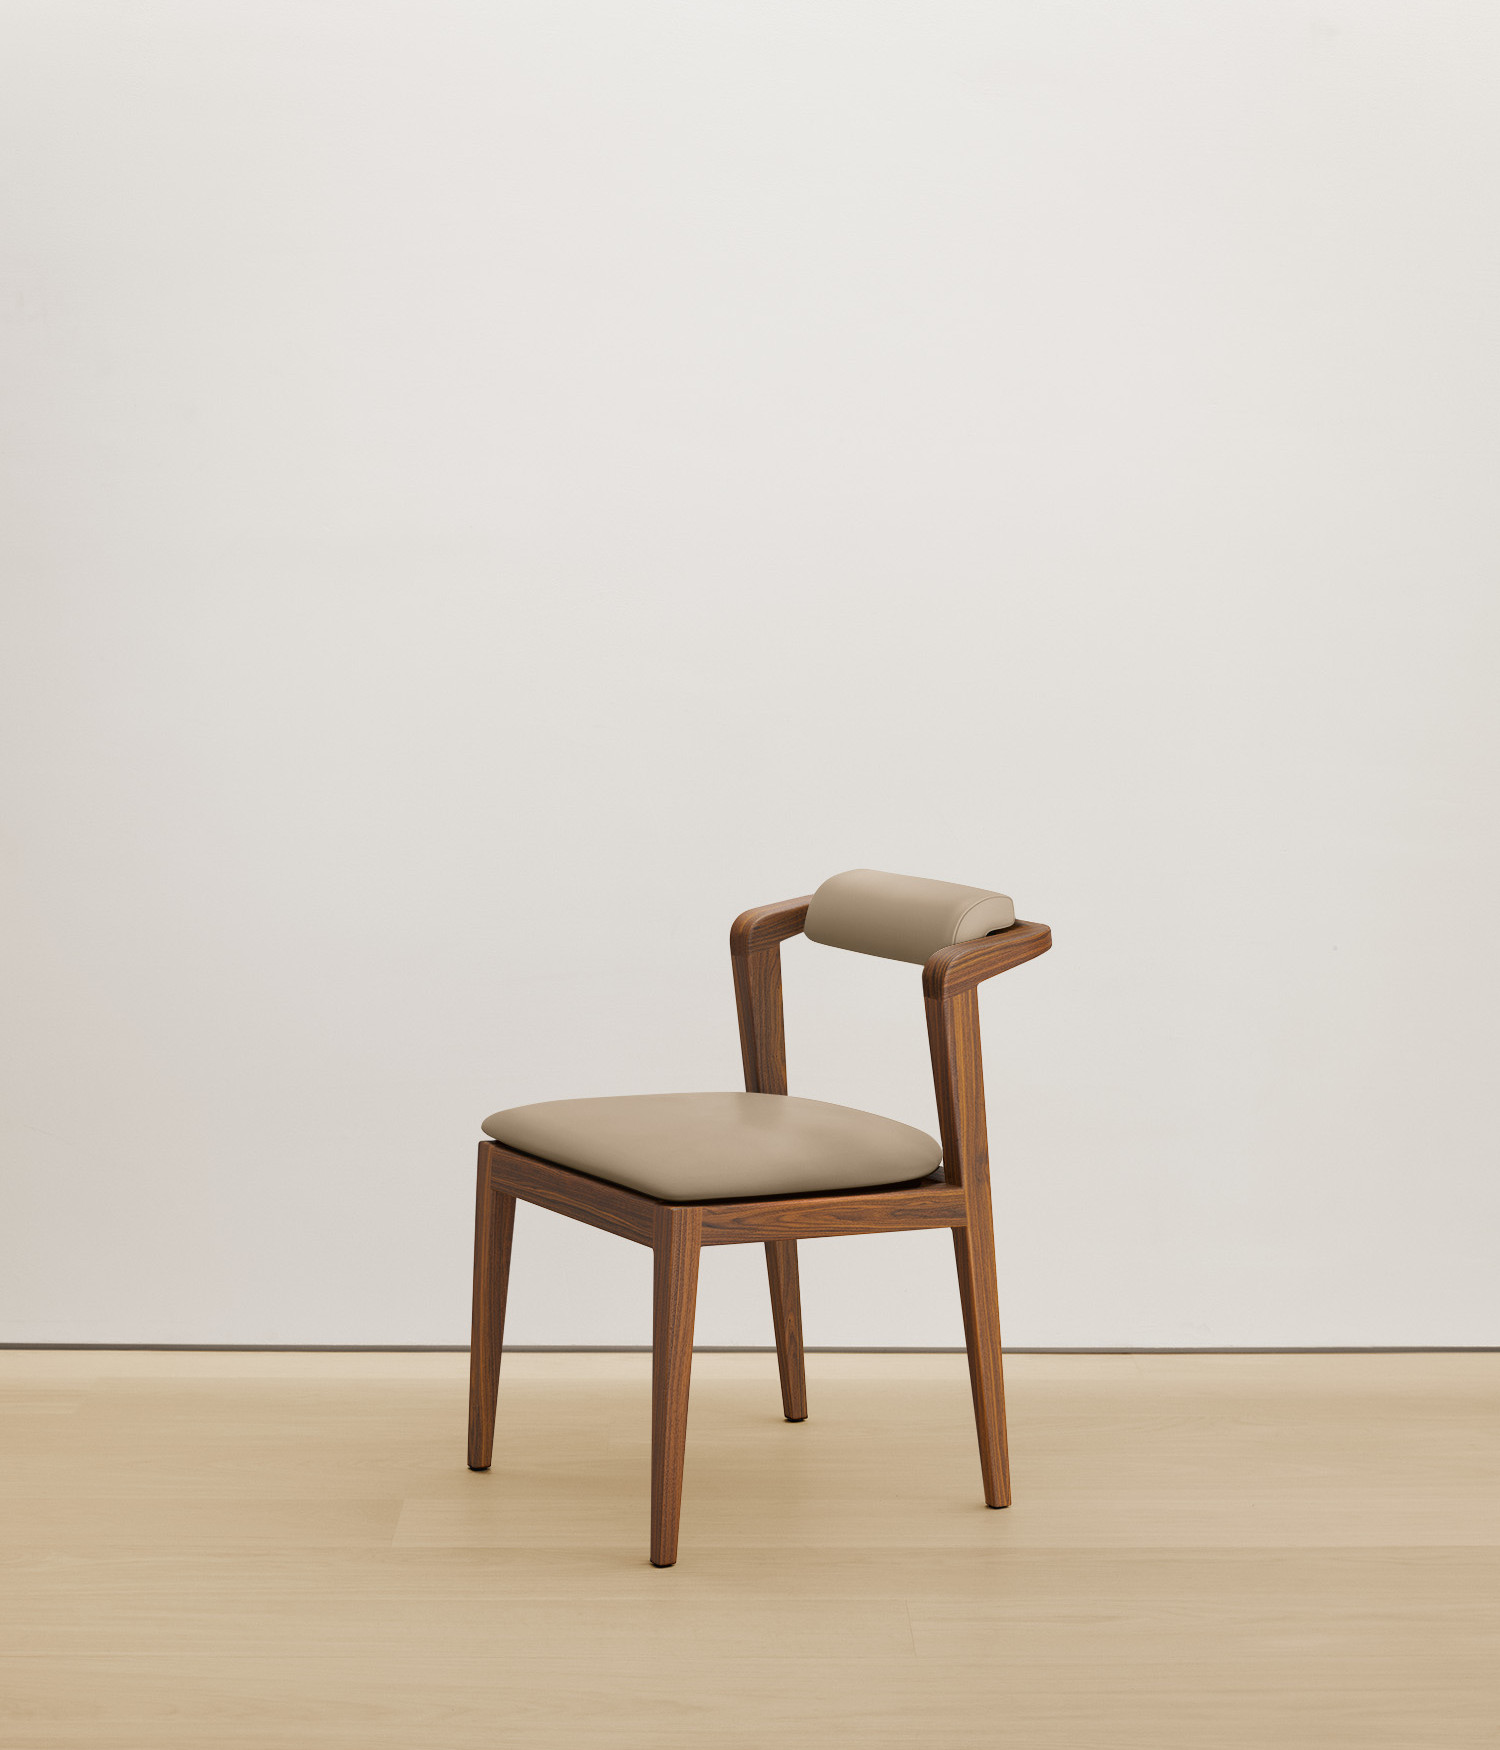  walnut chair with cream color upholstered seat 